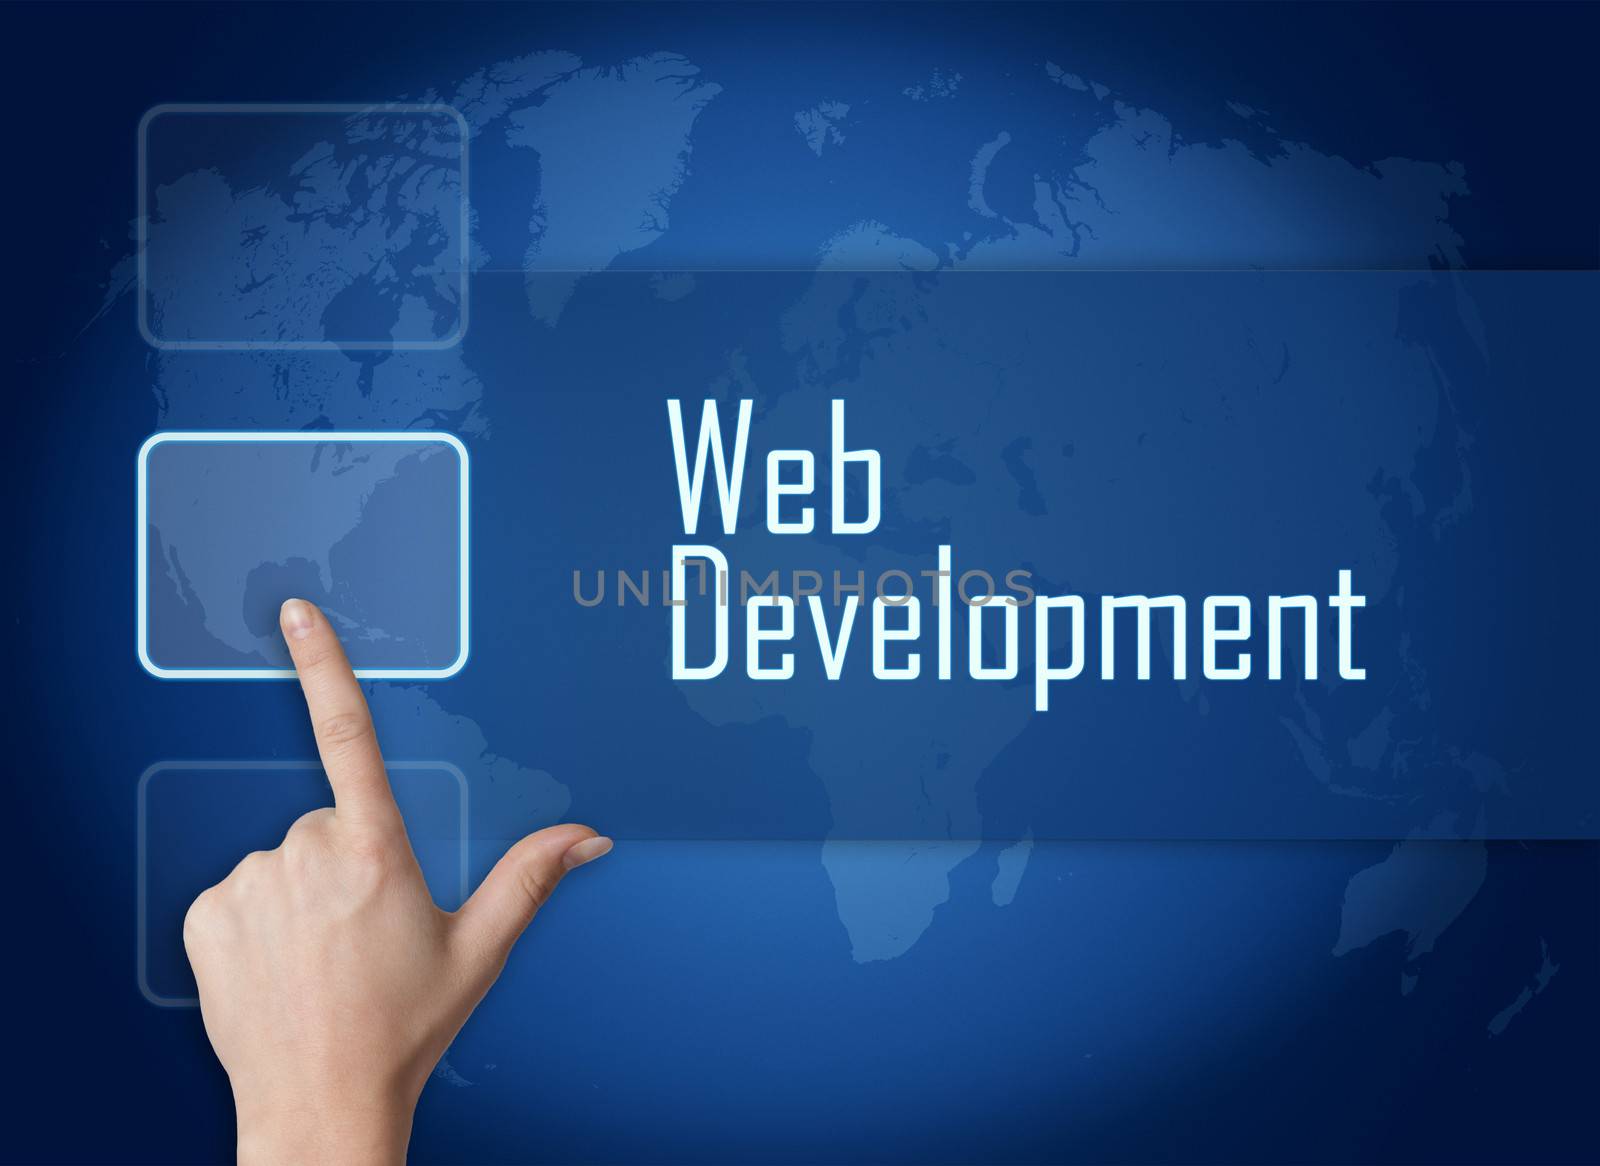 Web Development concept with interface and world map on blue background